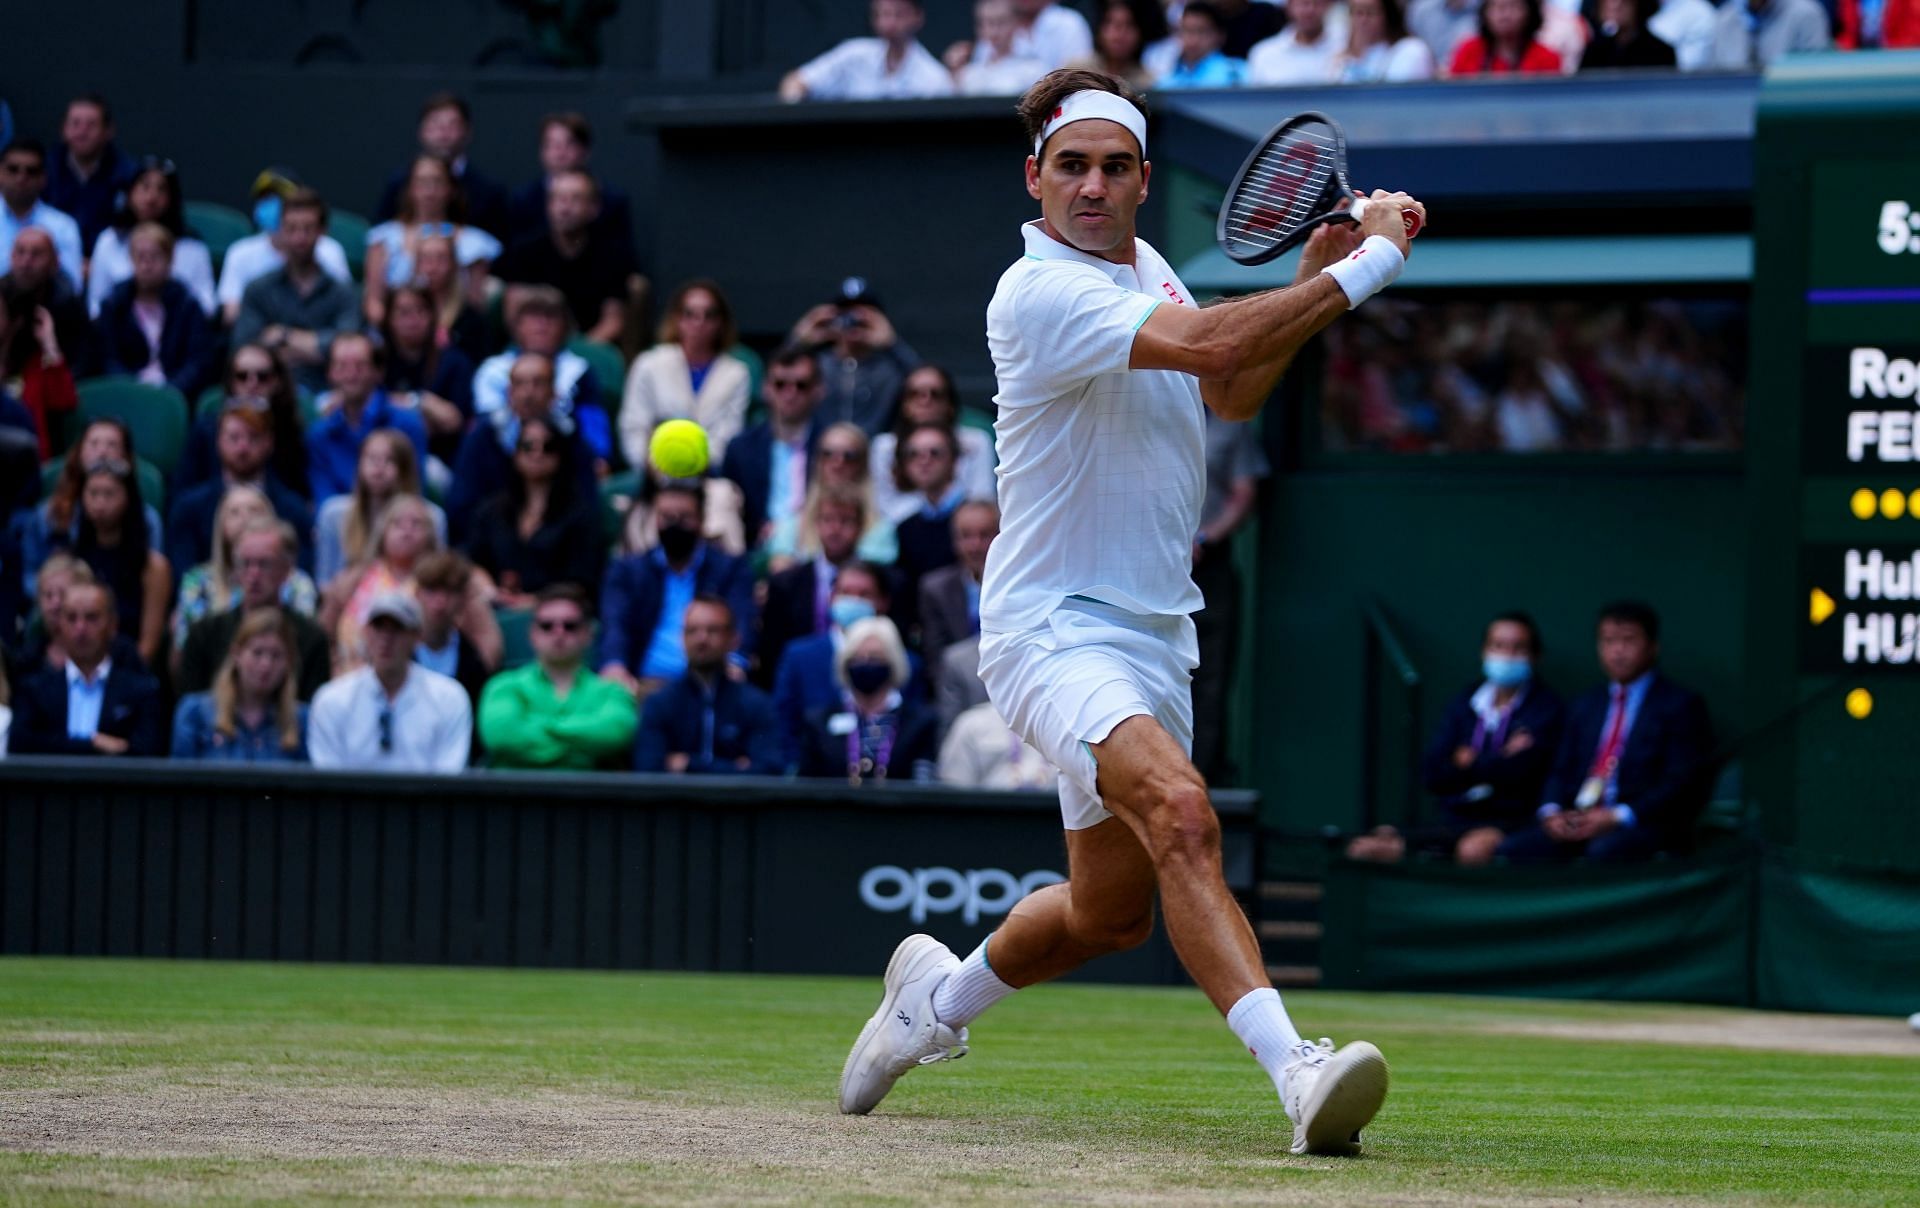 Federer in action at the Wimbledon Championships